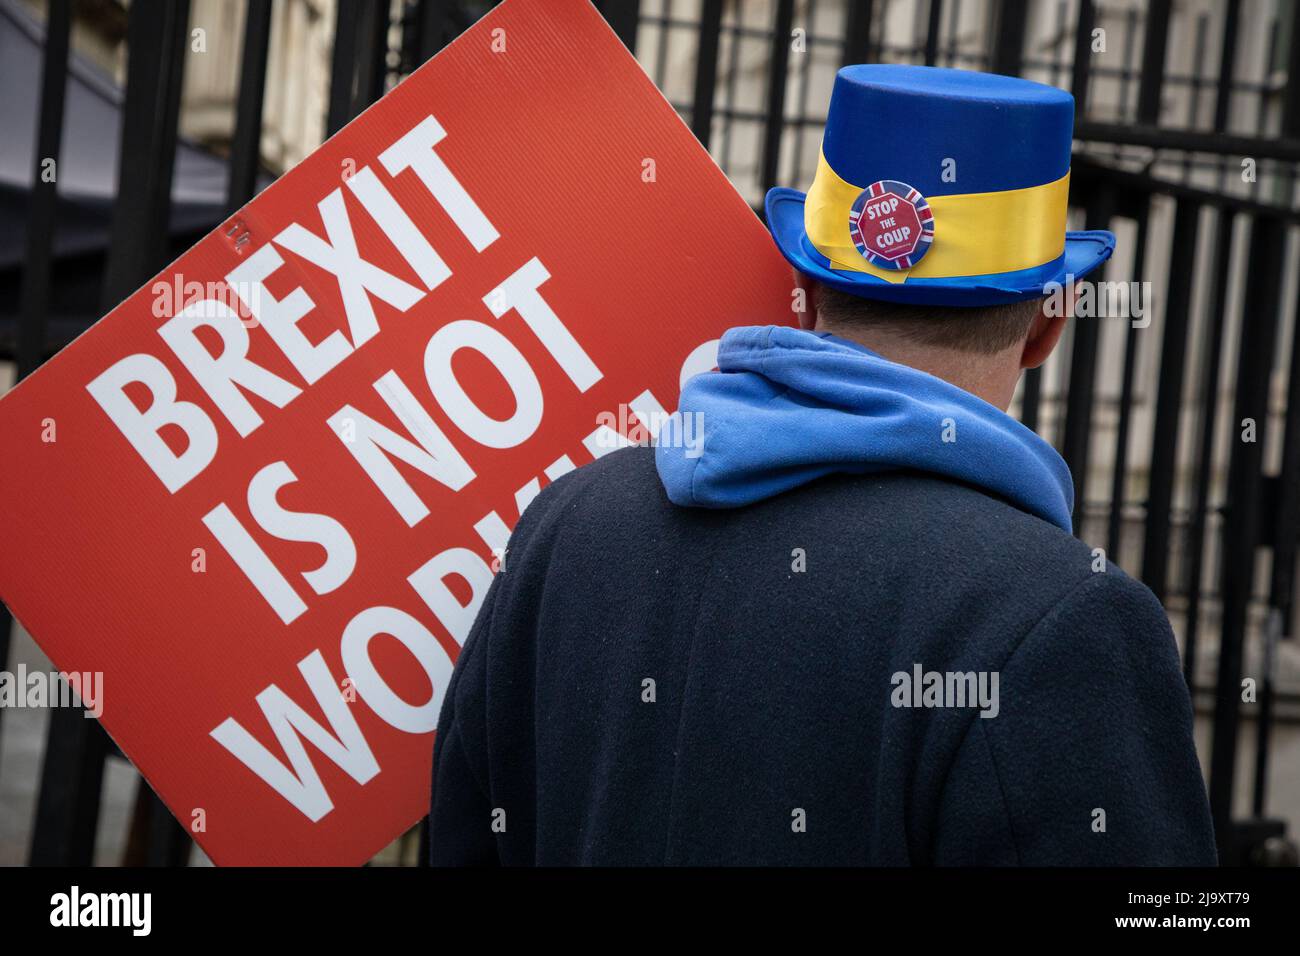 London, UK. 25 May 2022. Steve Bray, leader of Stand of Defiance European Movement (SODEM), stands outside Downing Street as the group continues their anti-Brexit campaign which began in September 2017 Credit: Kiki Streitberger/ Stock Photo